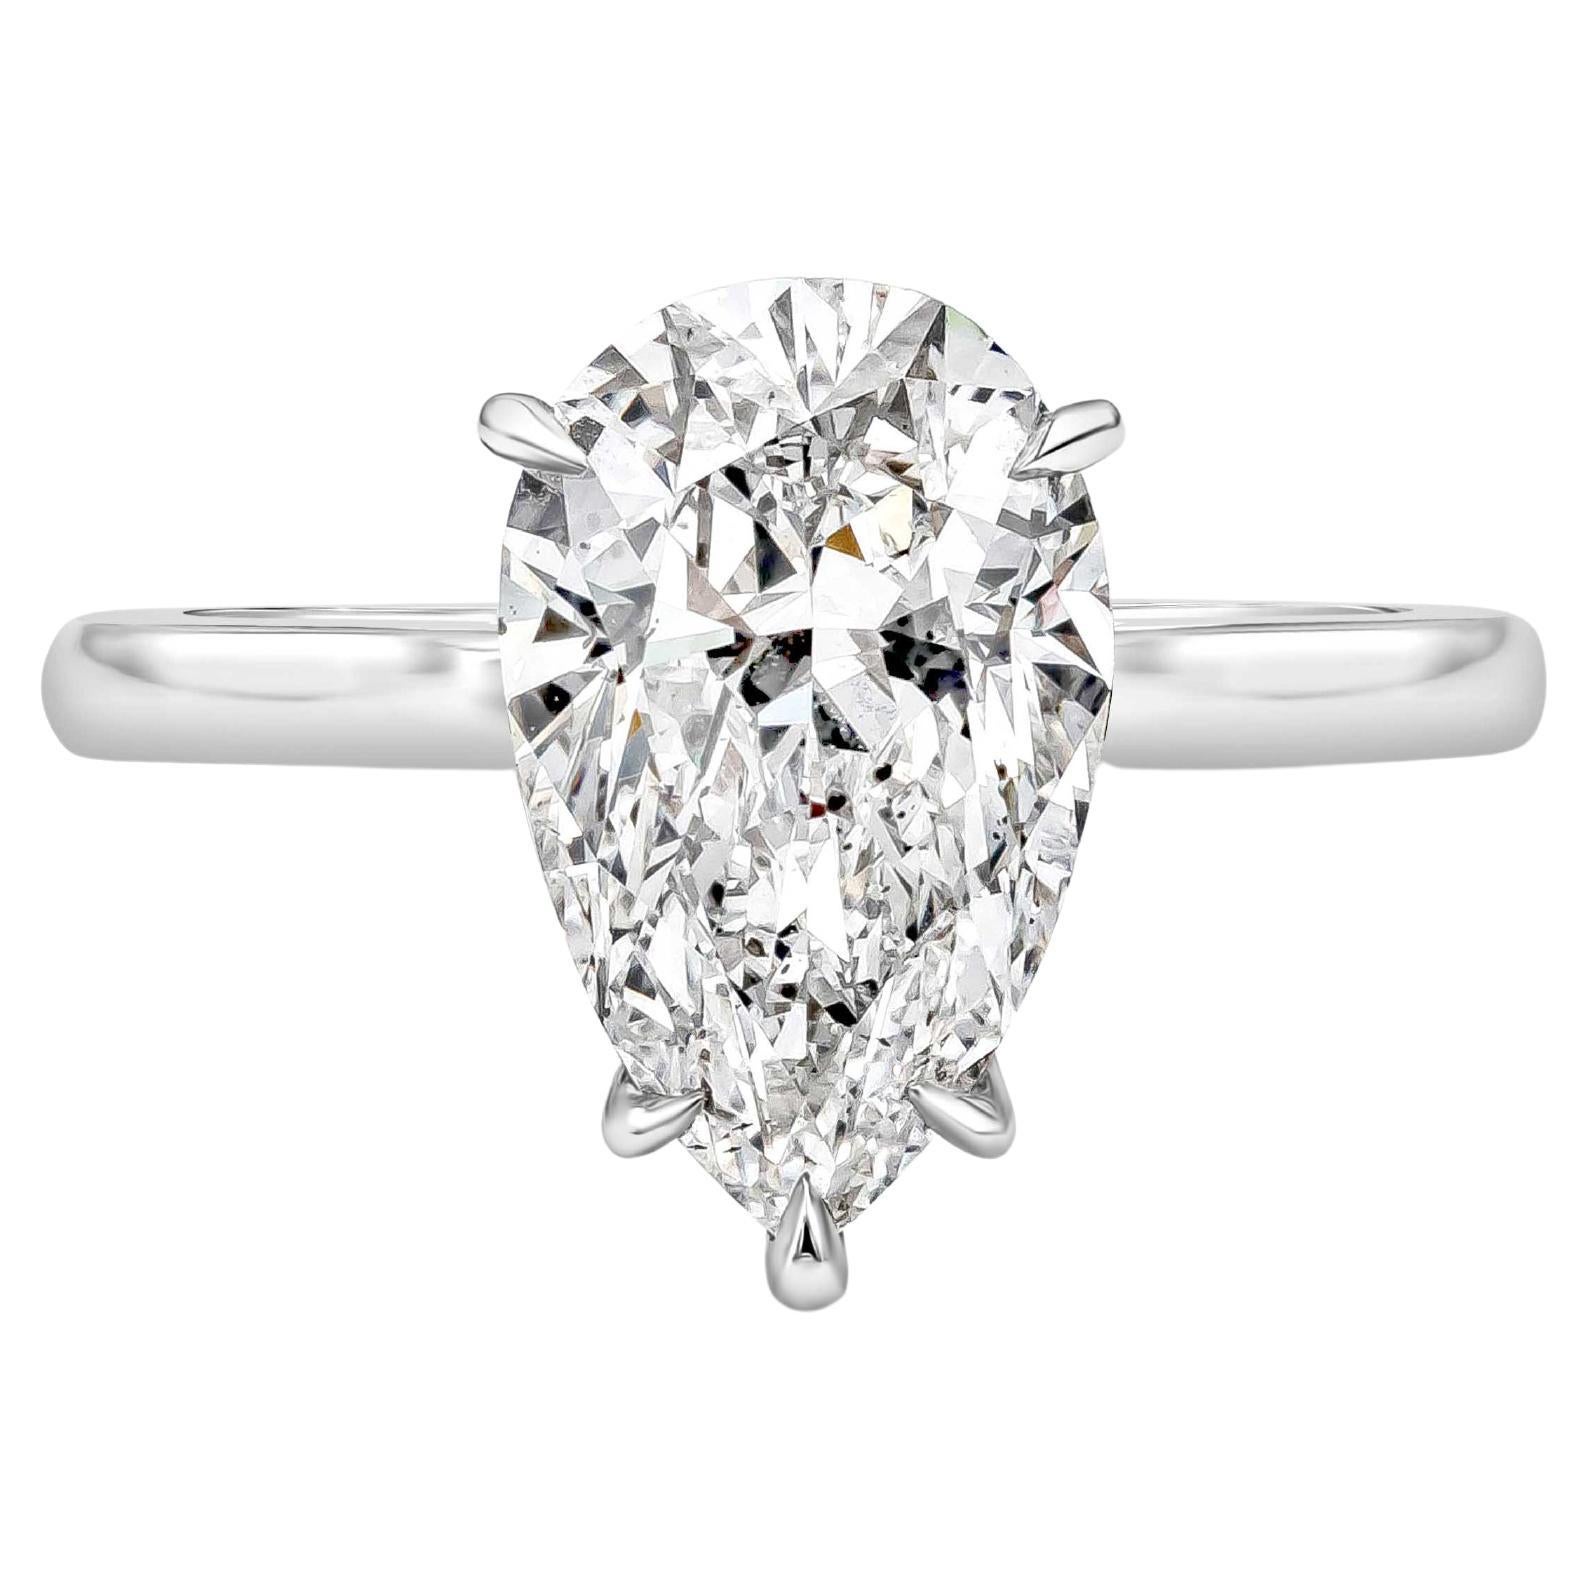 GIA Certified 3.27 Carats Total Pear Shape Diamond Solitaire Engagement Ring